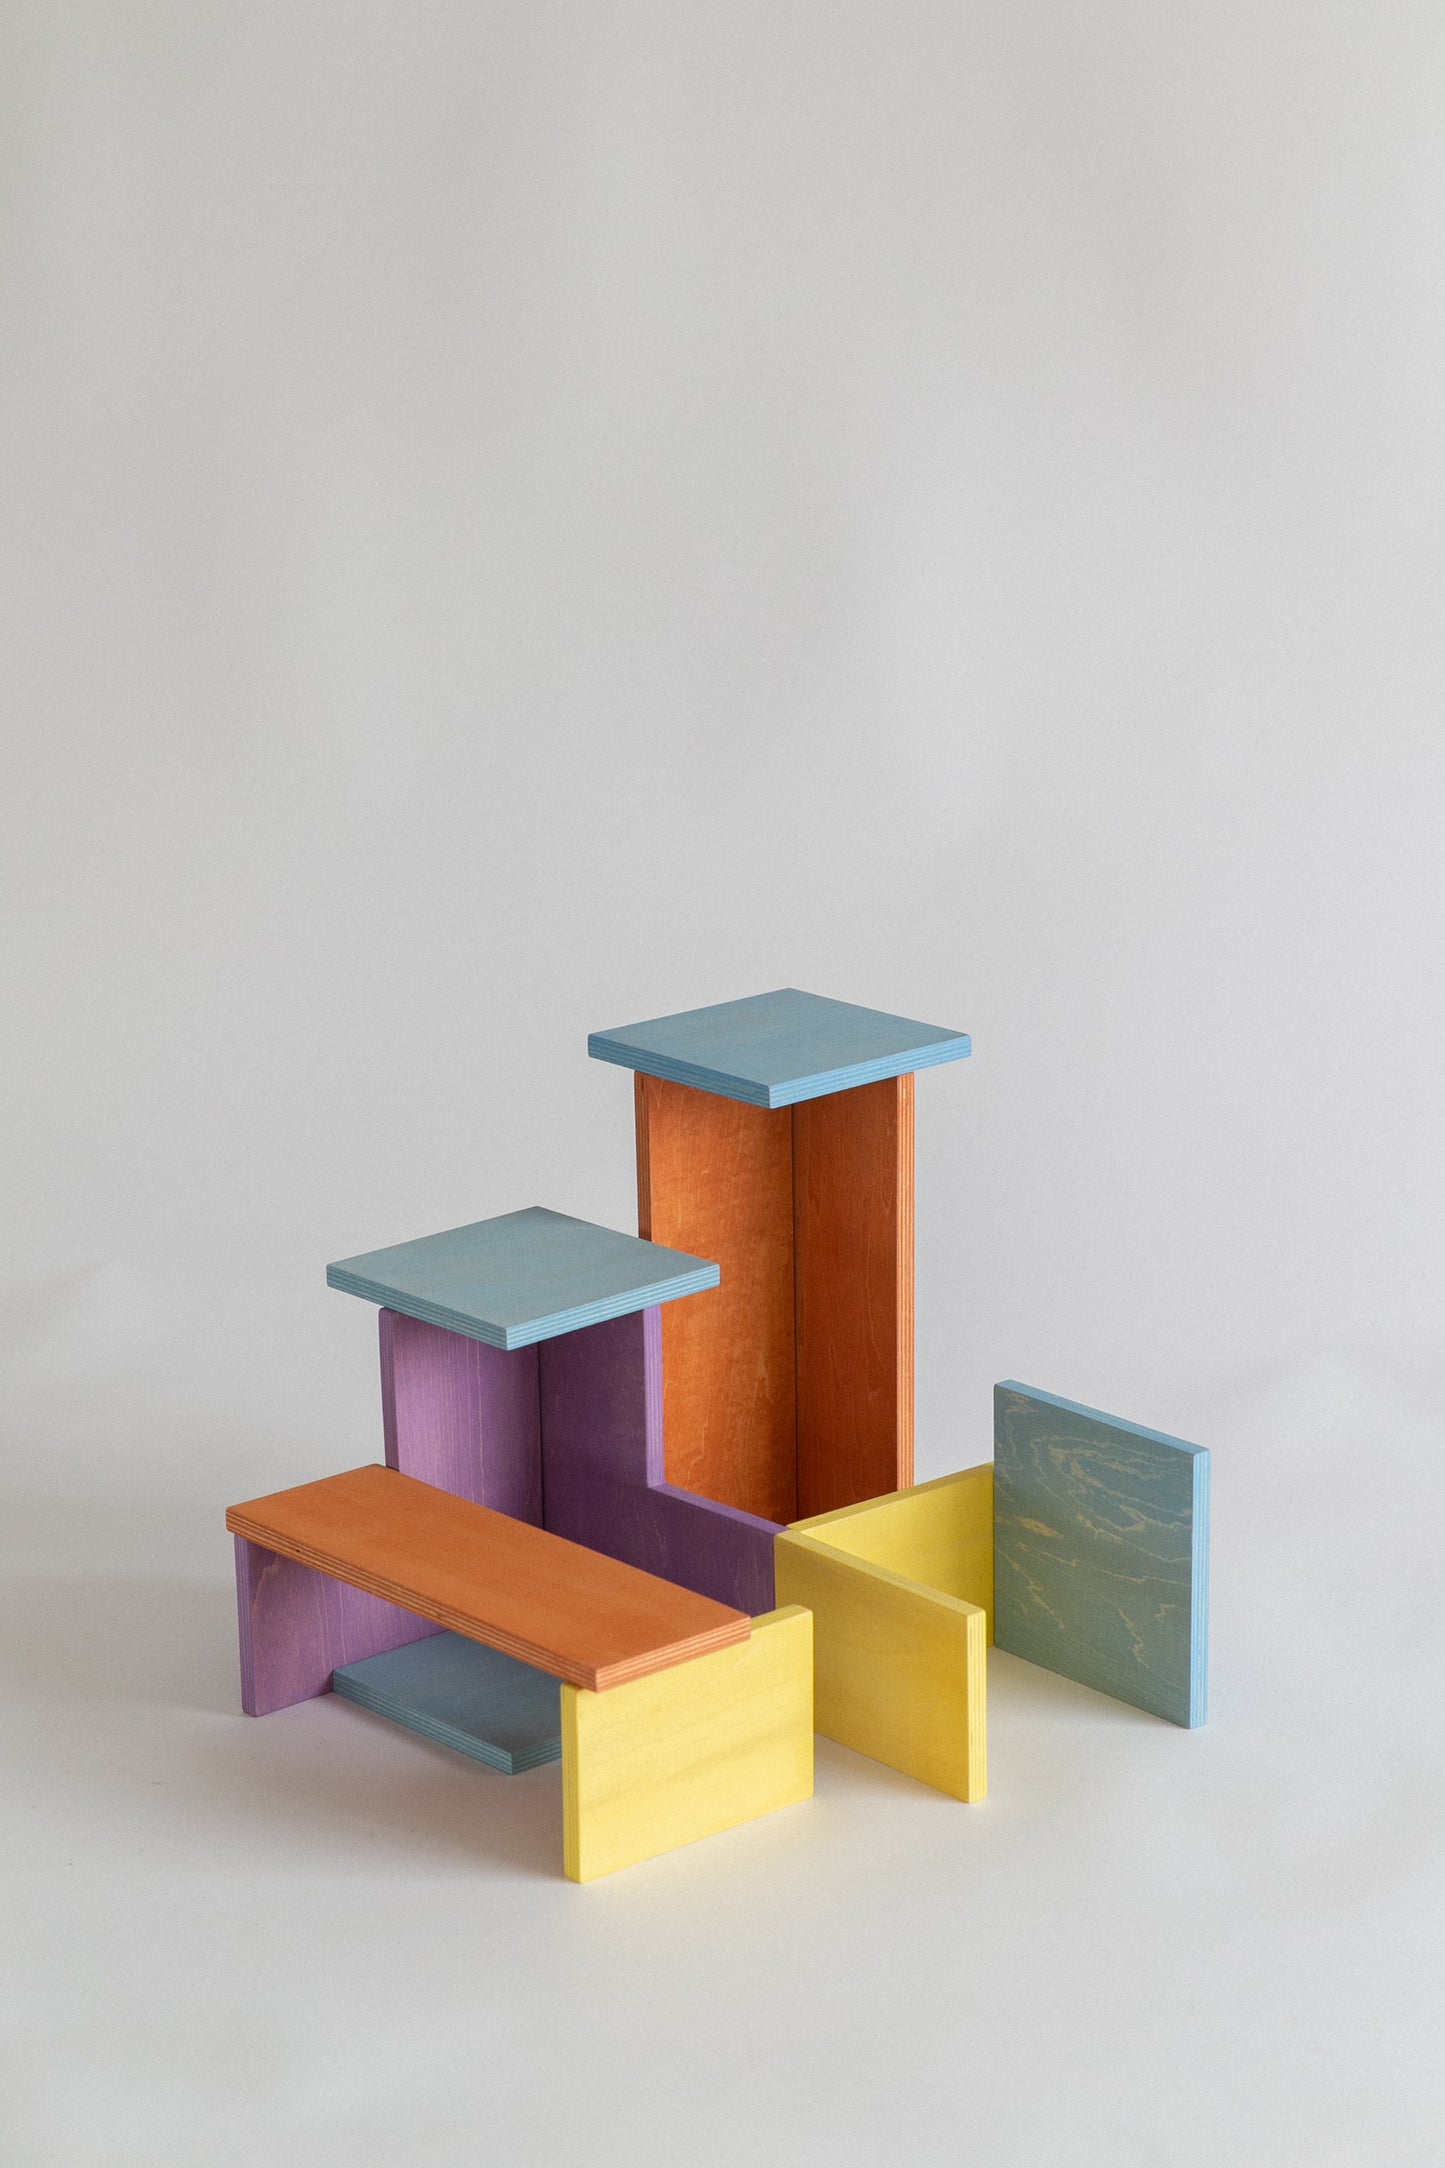 Architectural Block Sets by Avdar